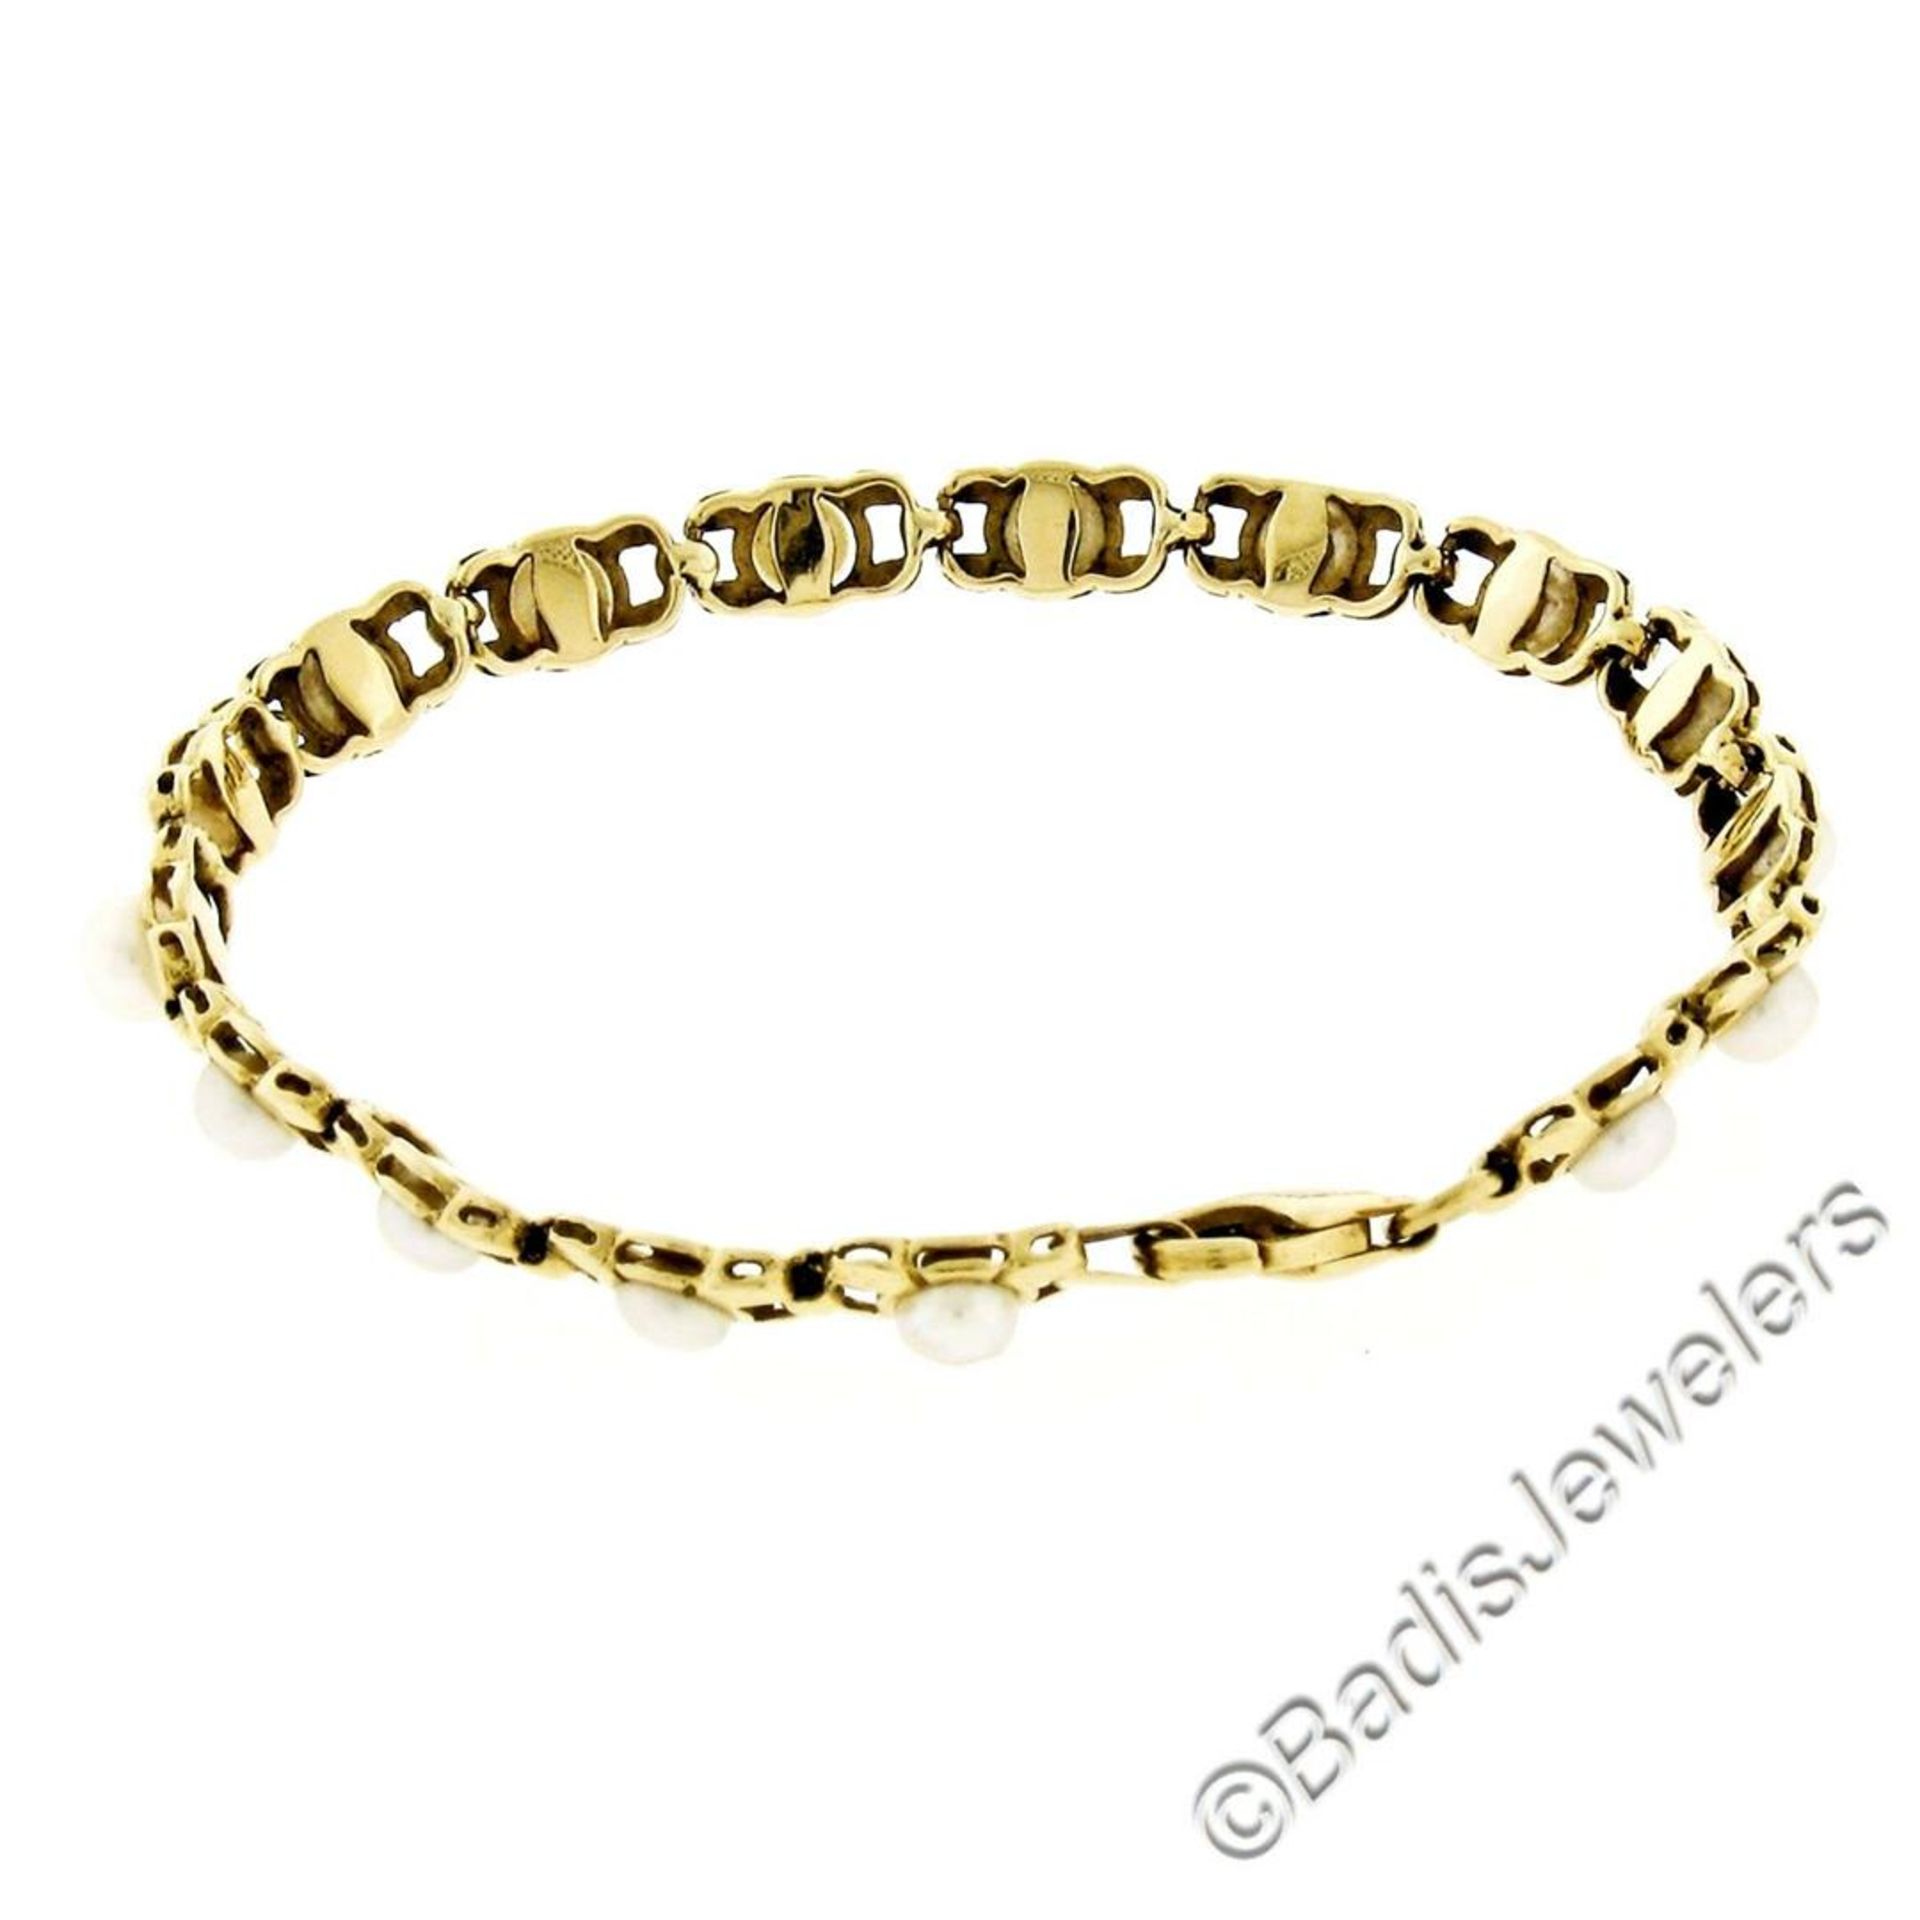 Vintage 14kt Yellow Gold Open Link and Natural Freshwater Pearl Tennis Bracelet - Image 5 of 7